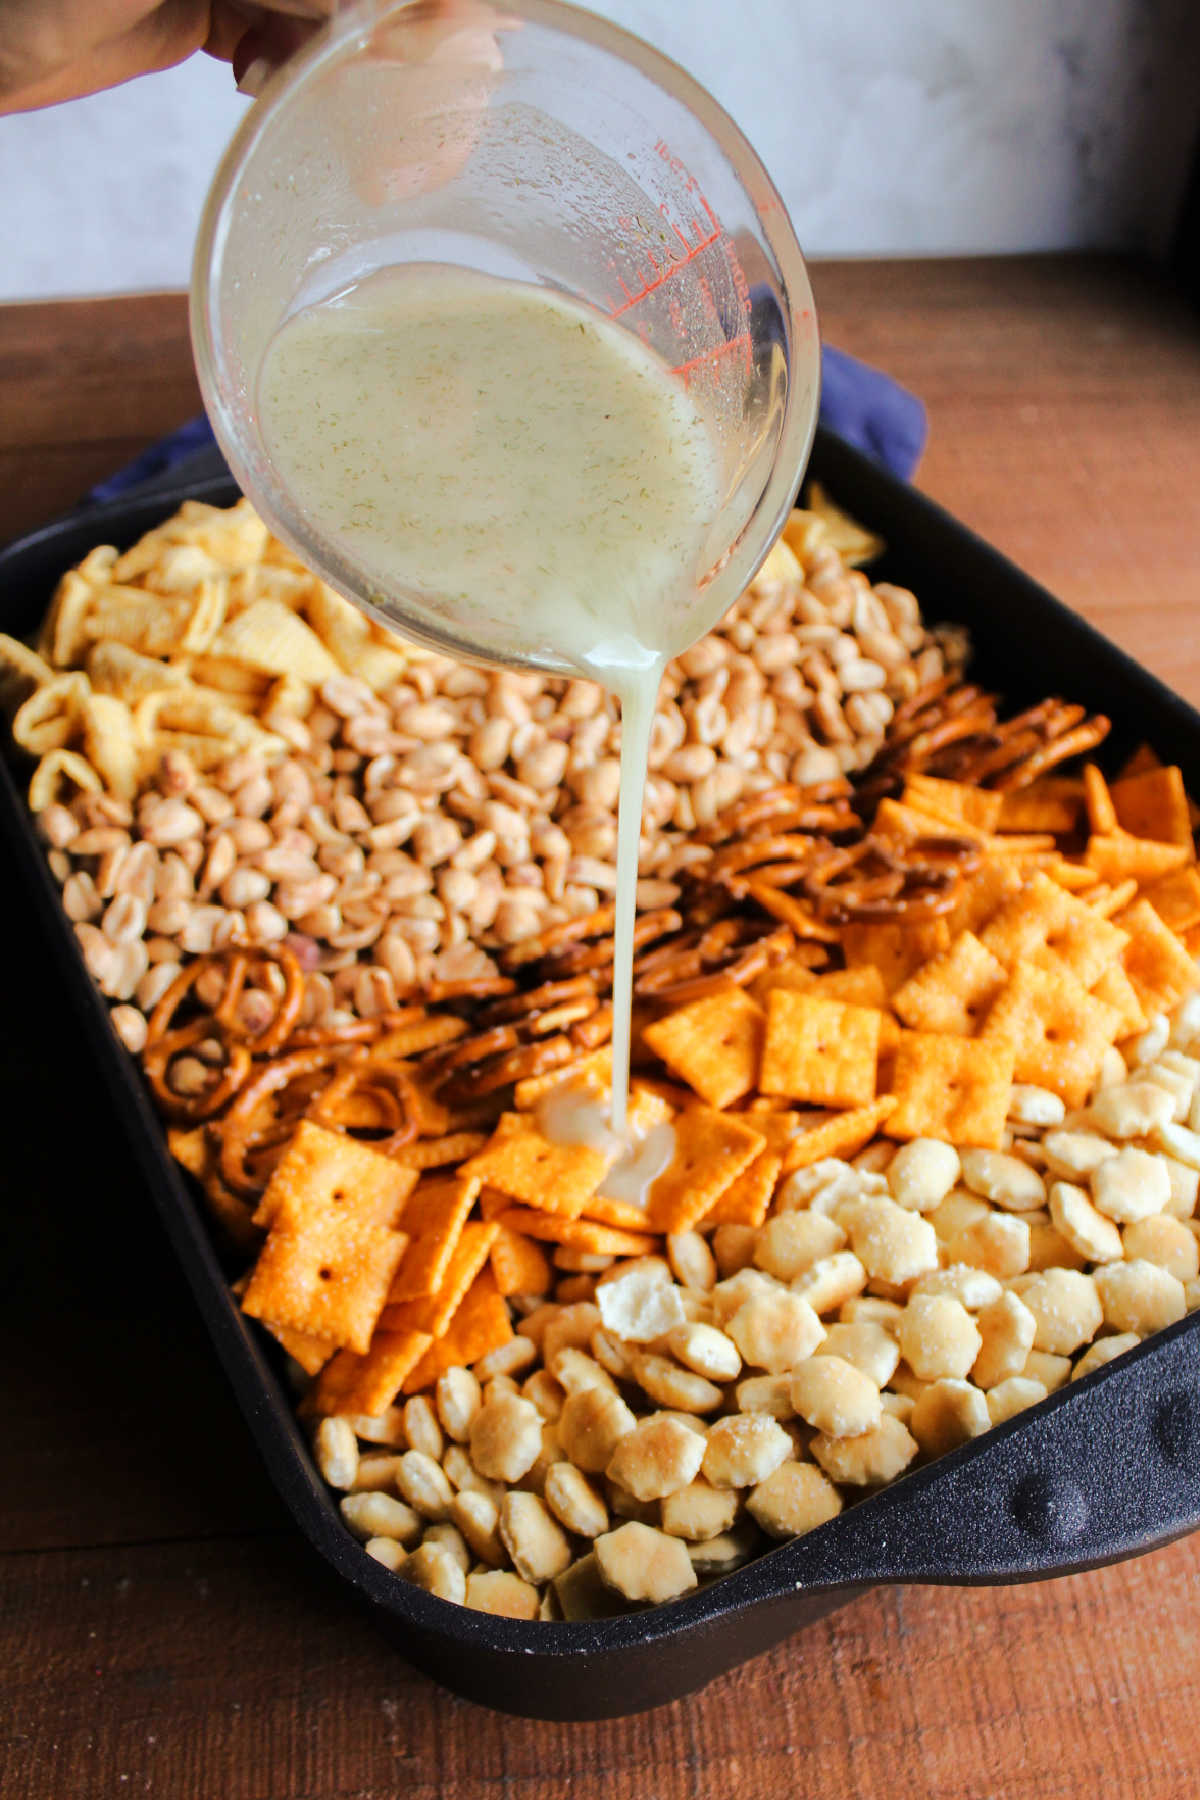 Pouring oil mixed with ranch seasoning over peanuts and crackers in roasting pan.